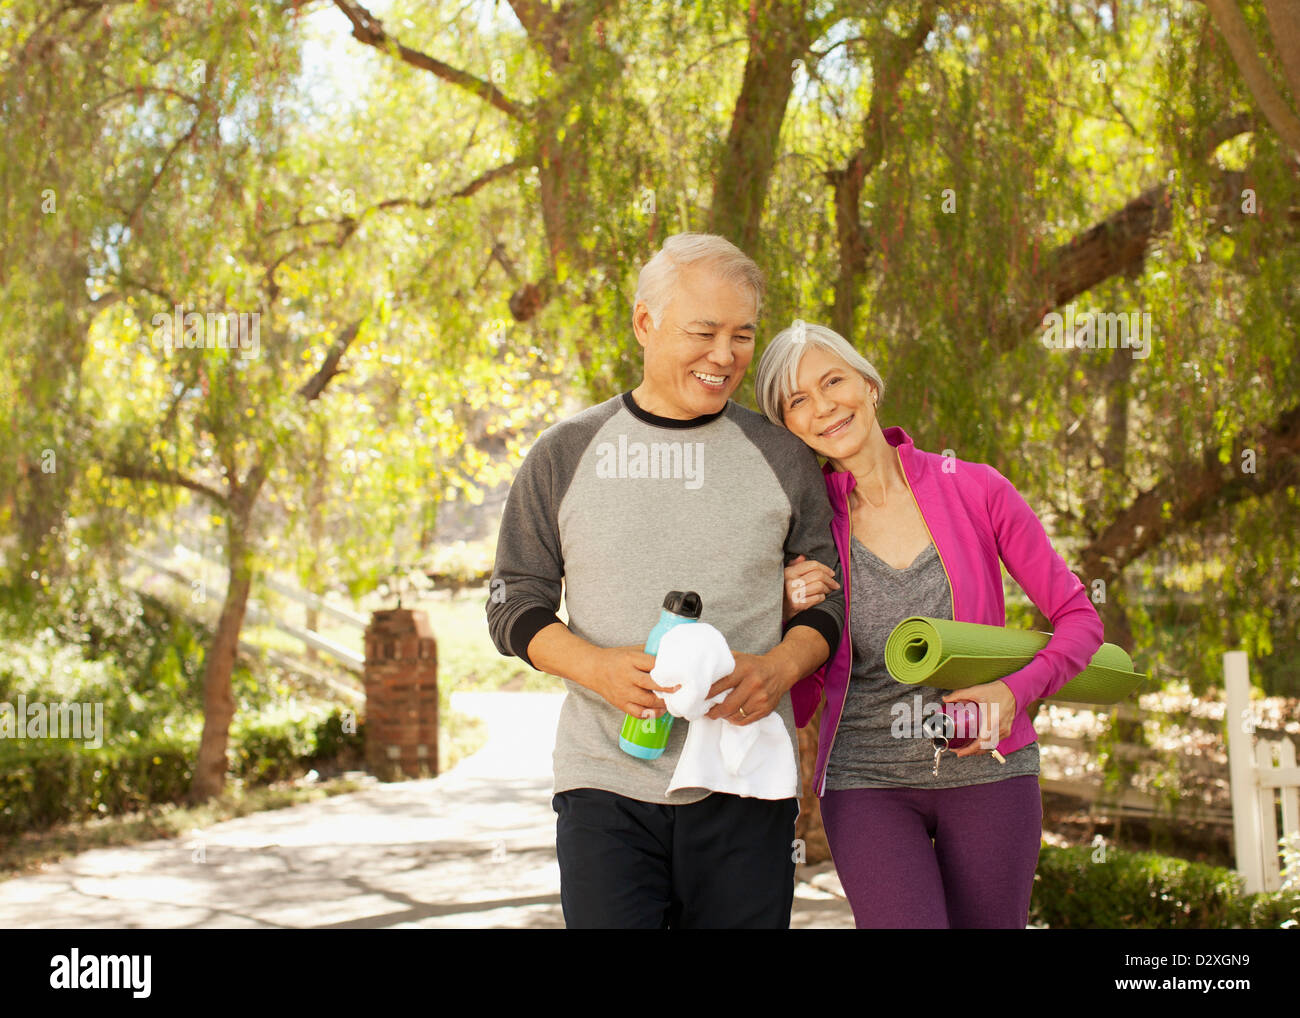 Older couple walking together outdoors Stock Photo